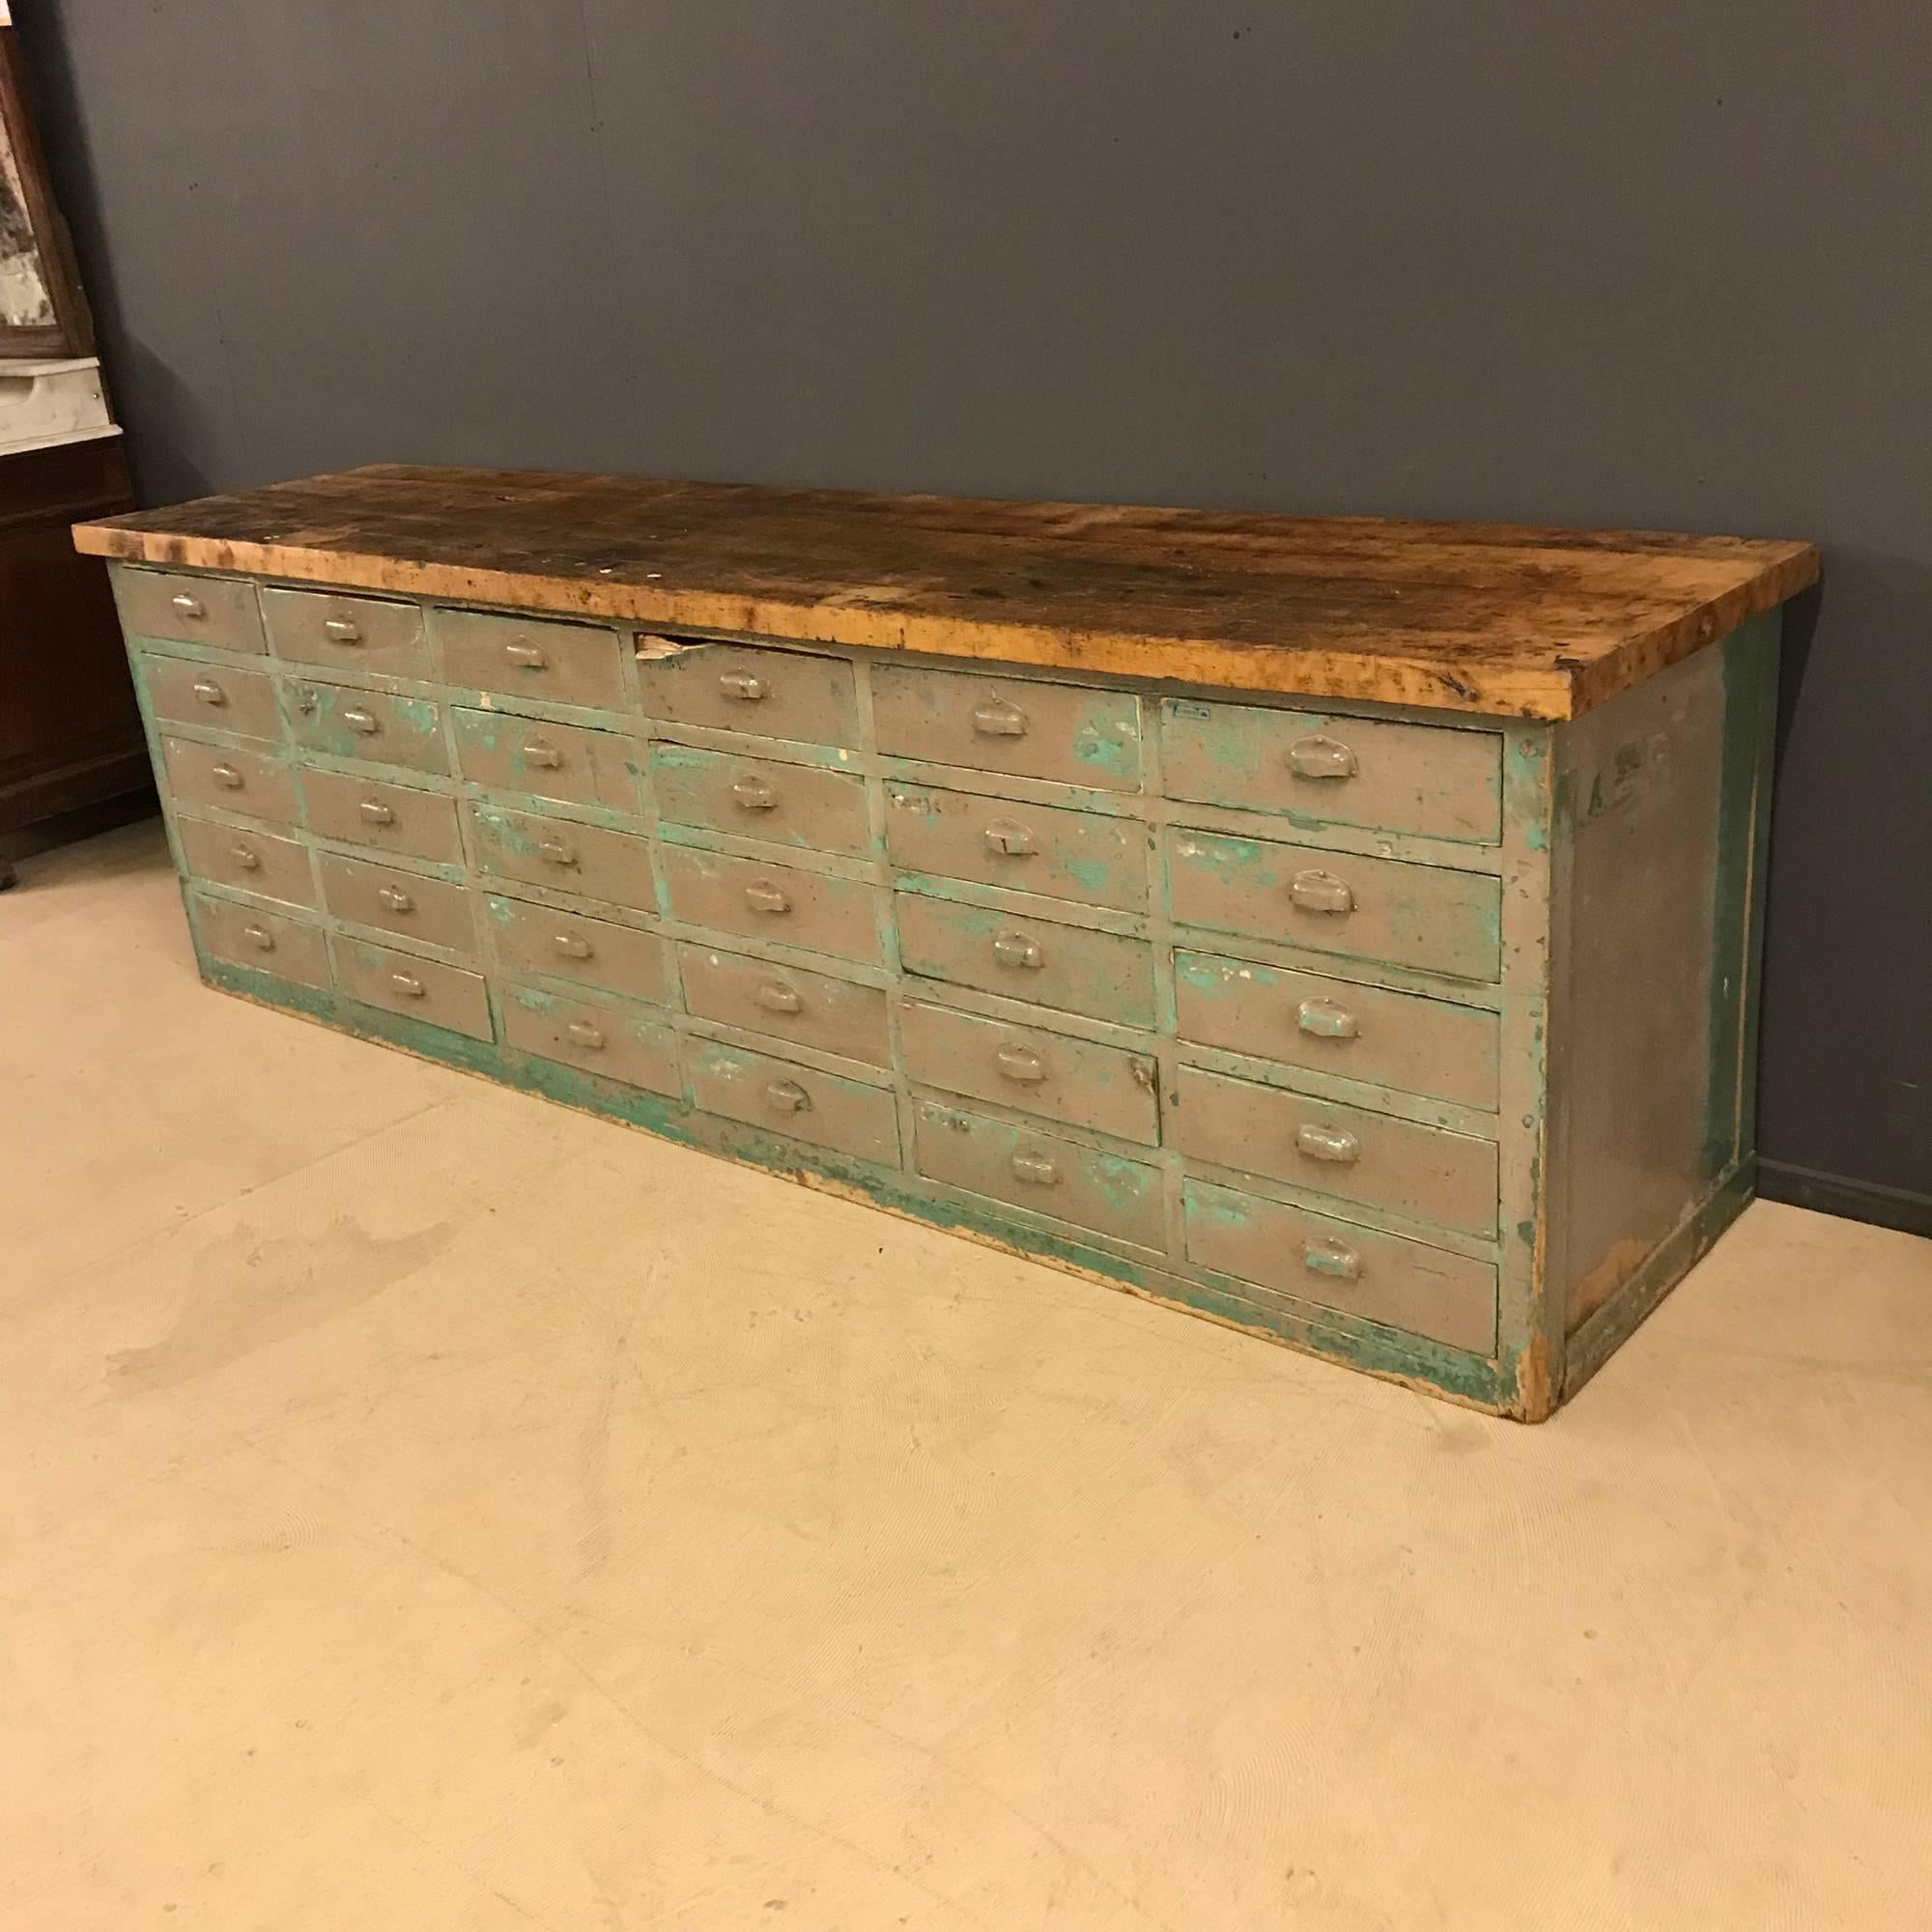 Big bank of drawers with nice original handles and oak wooden top. Has 30 drawers and nice patina. Was used in a factory workshop for storage. With signs of use it remains in good fair condition.